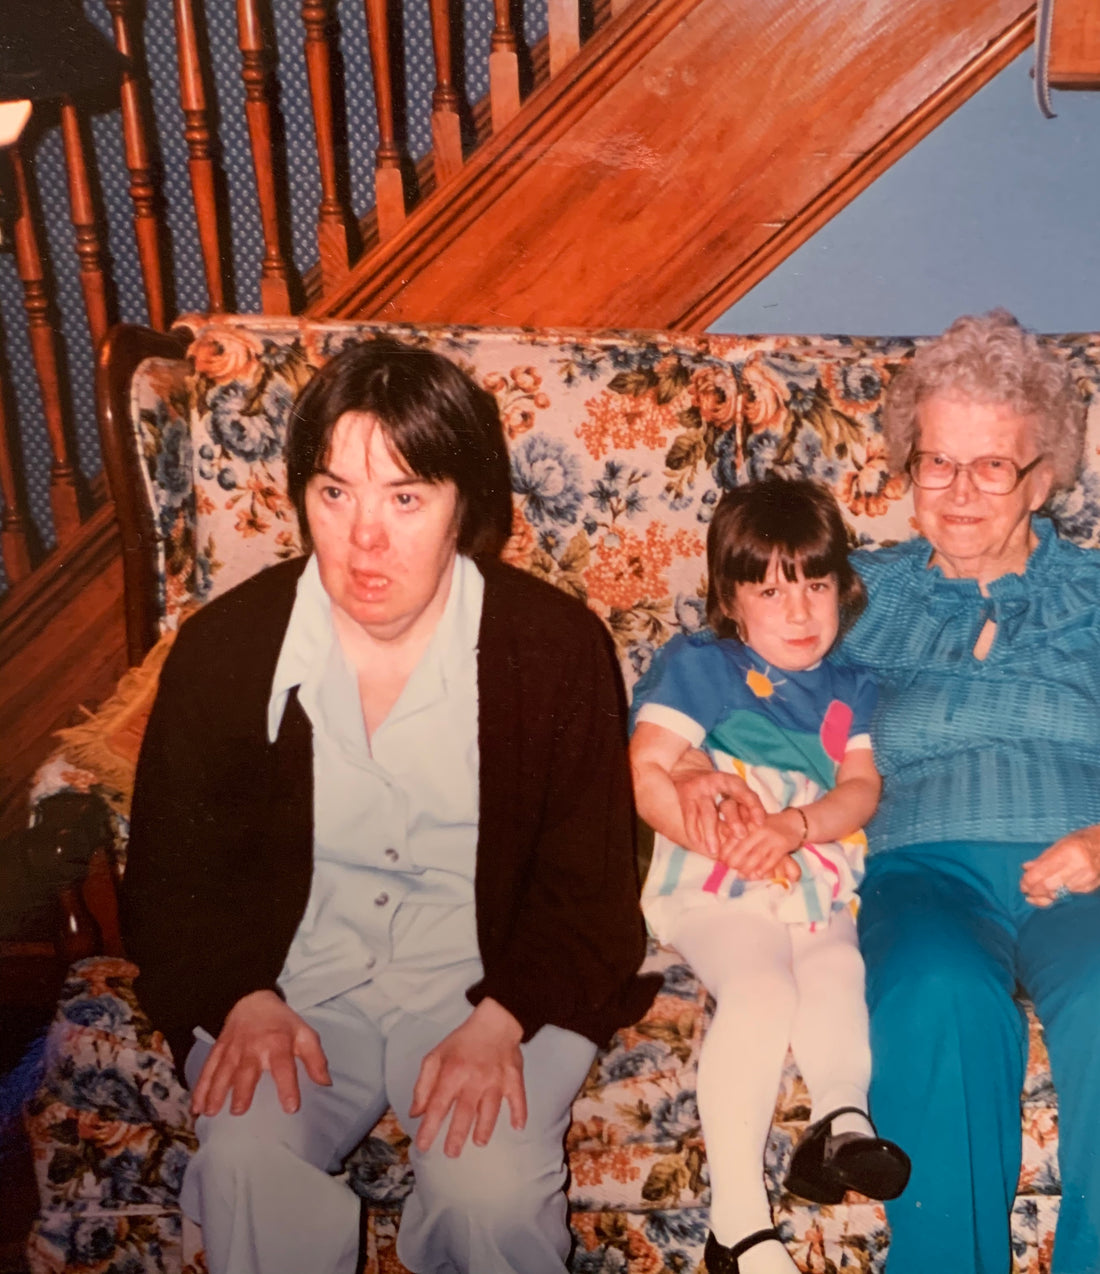 Me with my Aunt Sarah Jane (Down Syndrome) and my Great Grandmother Mimi Hannah